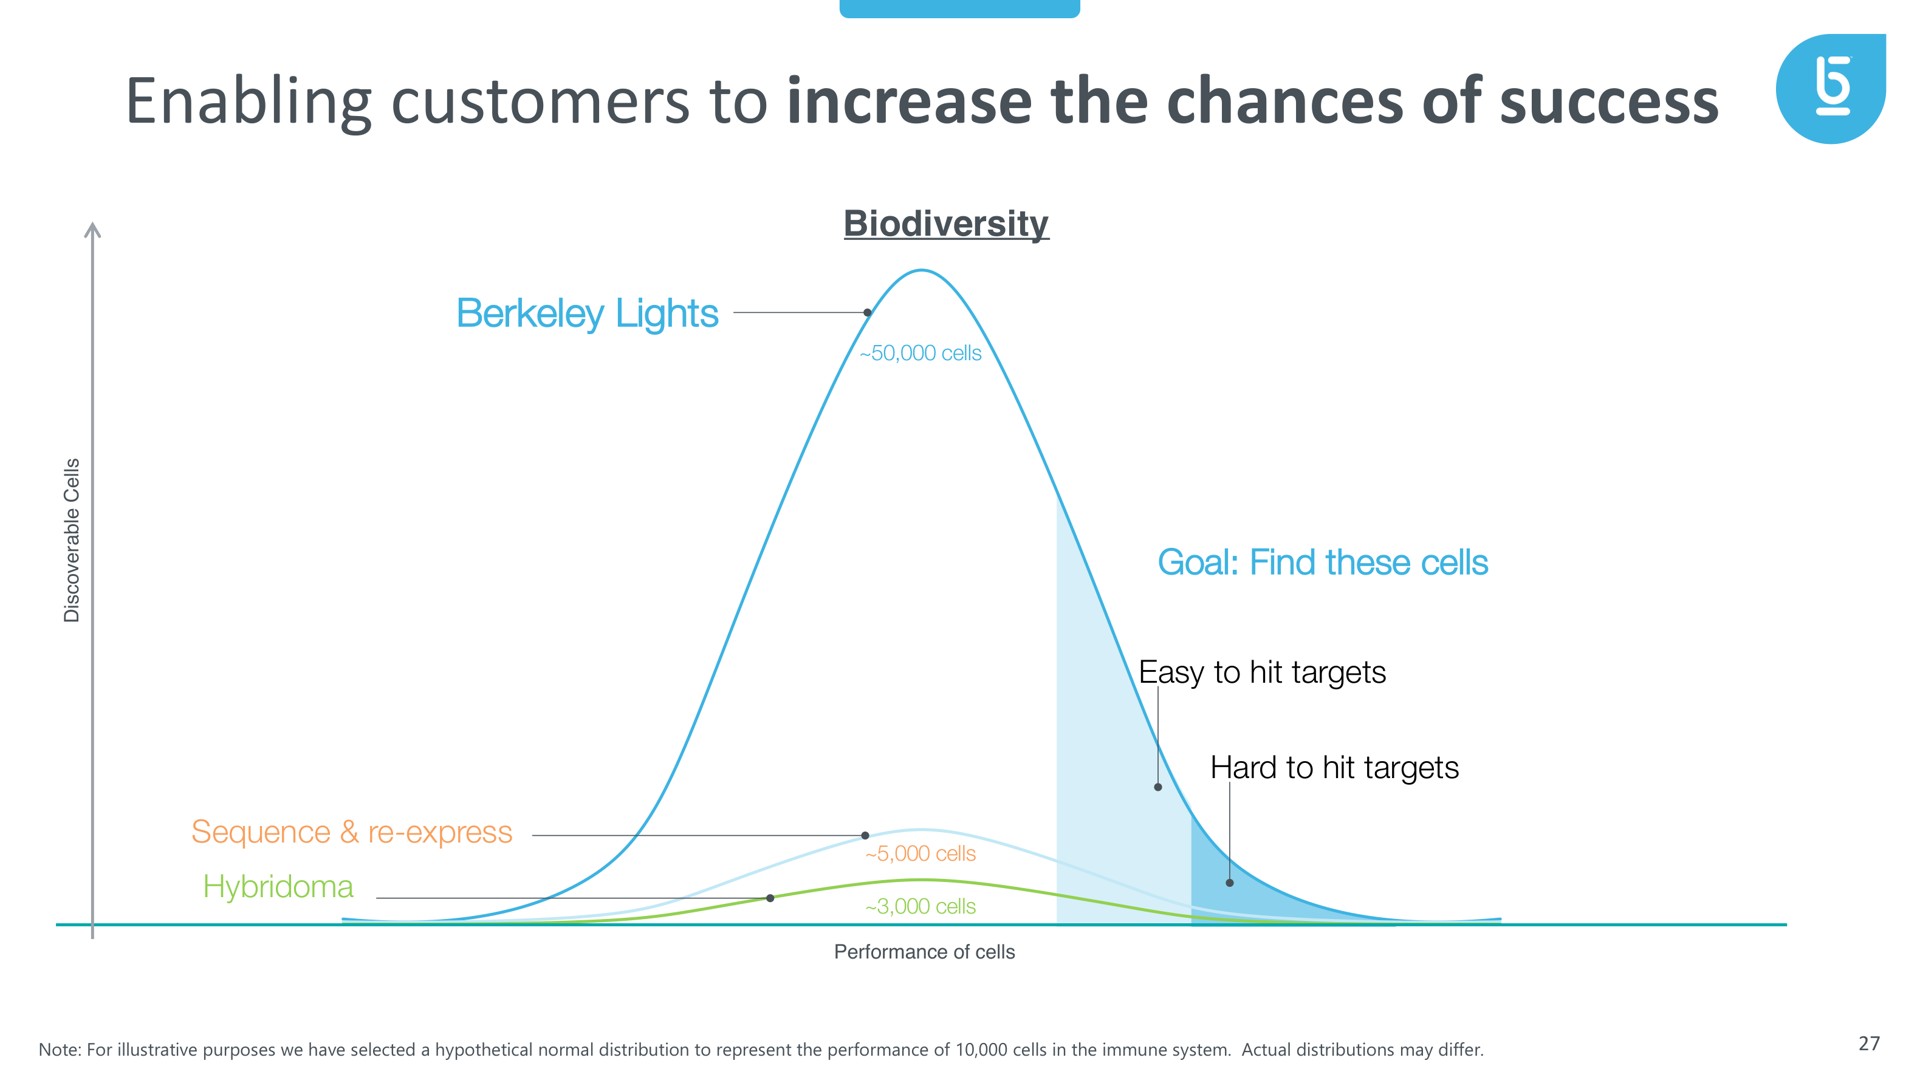 enabling customers to increase the chances of success | Berkeley Lights